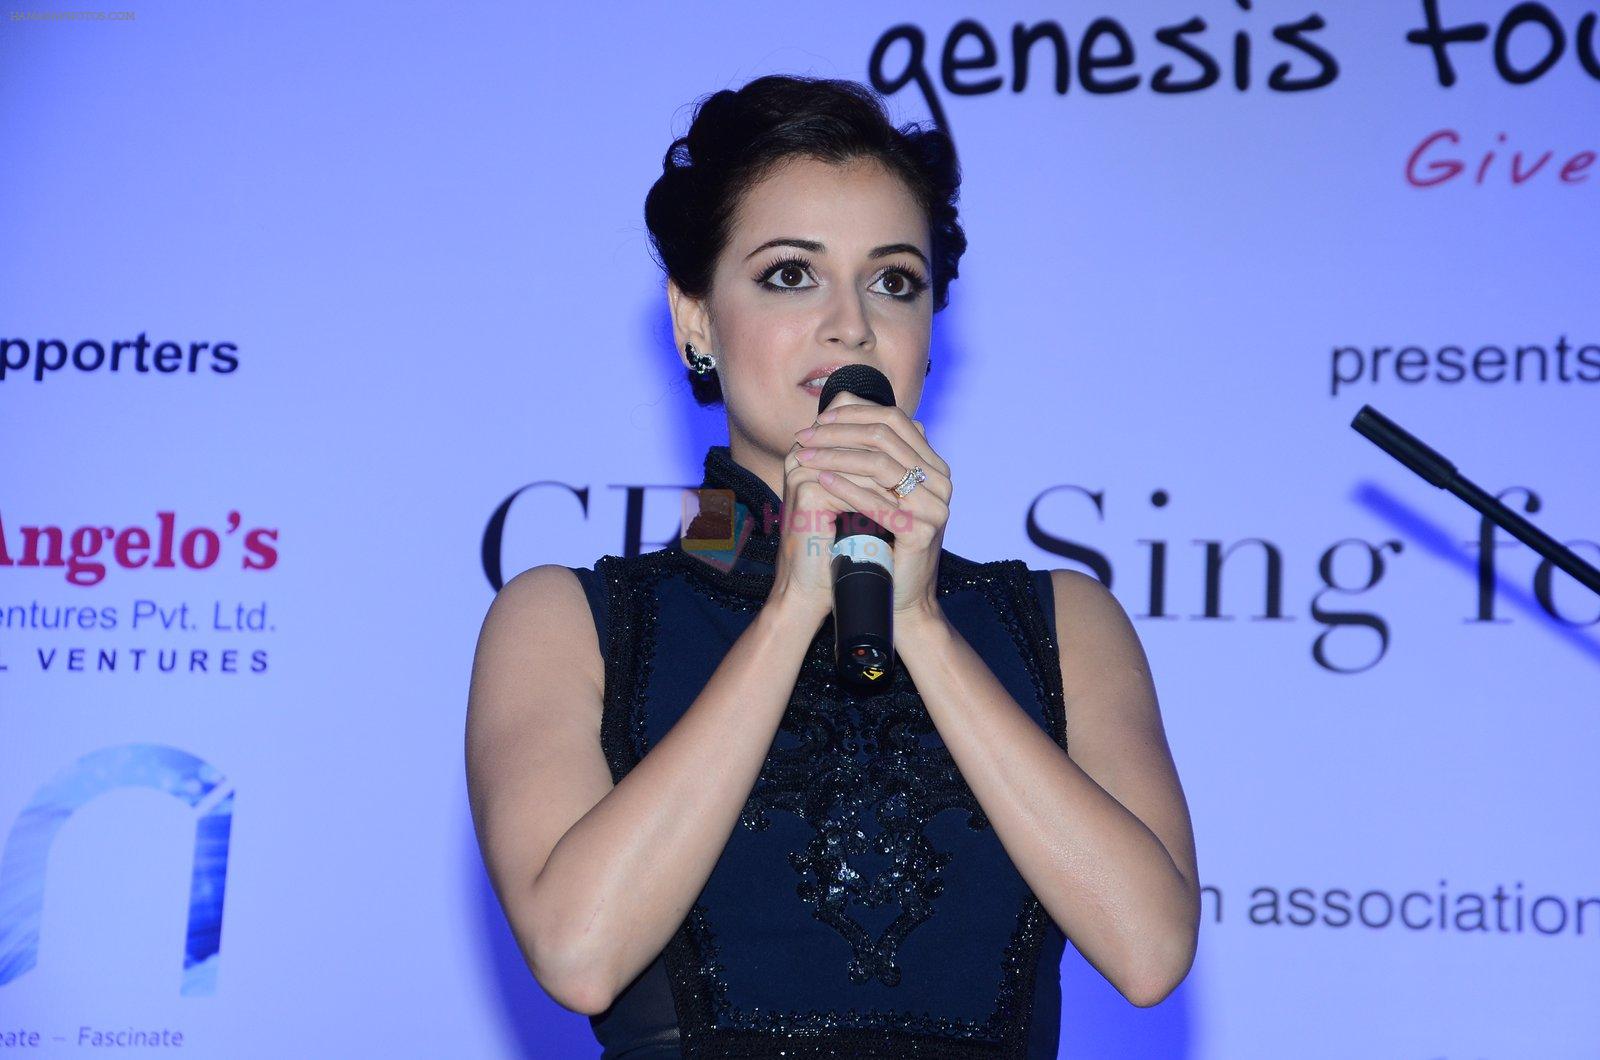 Dia Mirza during the event organised by Genesis Foundation in Mumbai, India on June 11, 2016